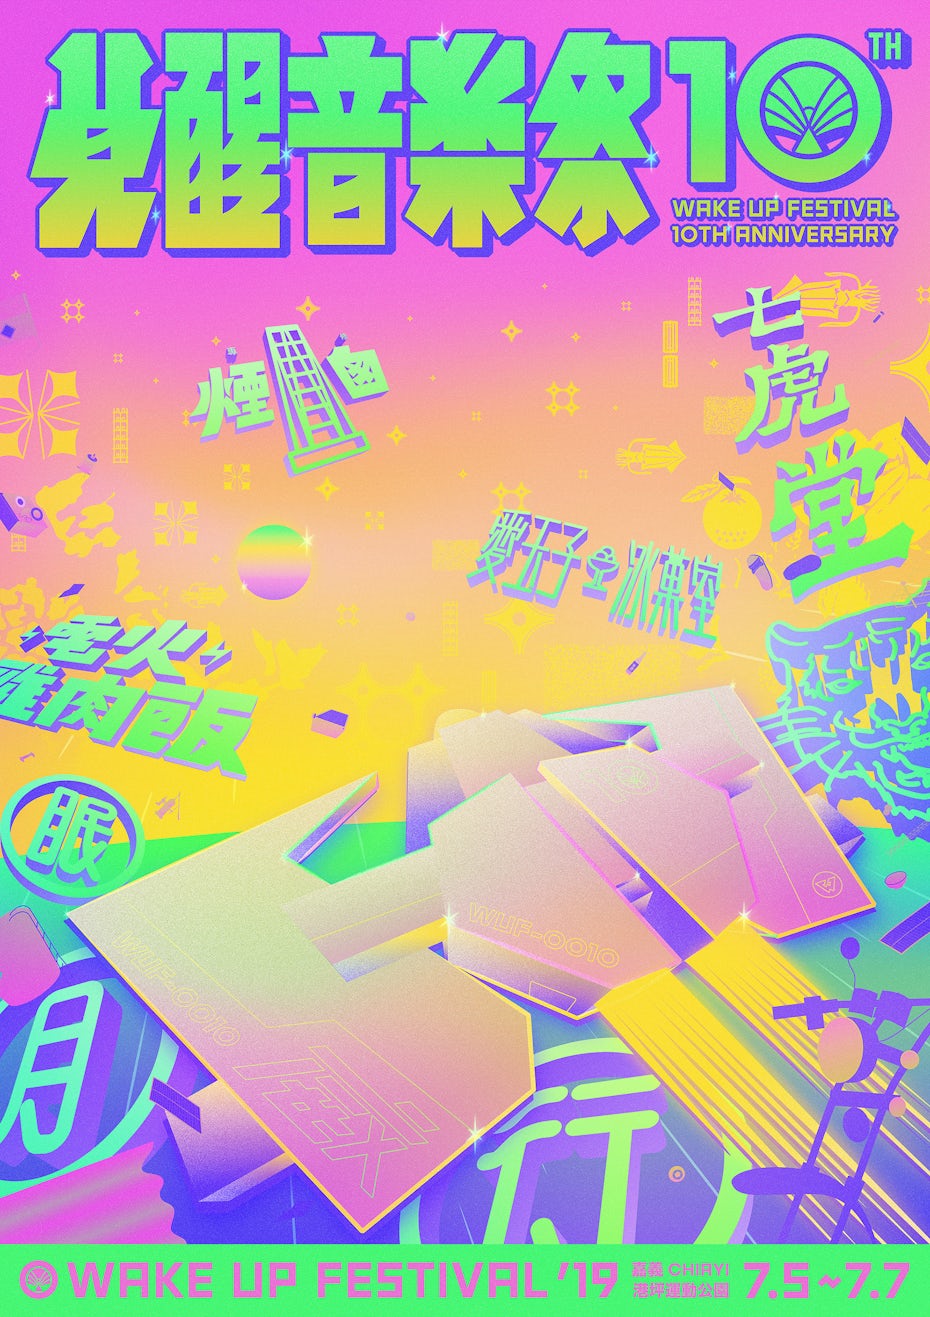 Graphic design trends 2020: Neon colored Japanese poster design